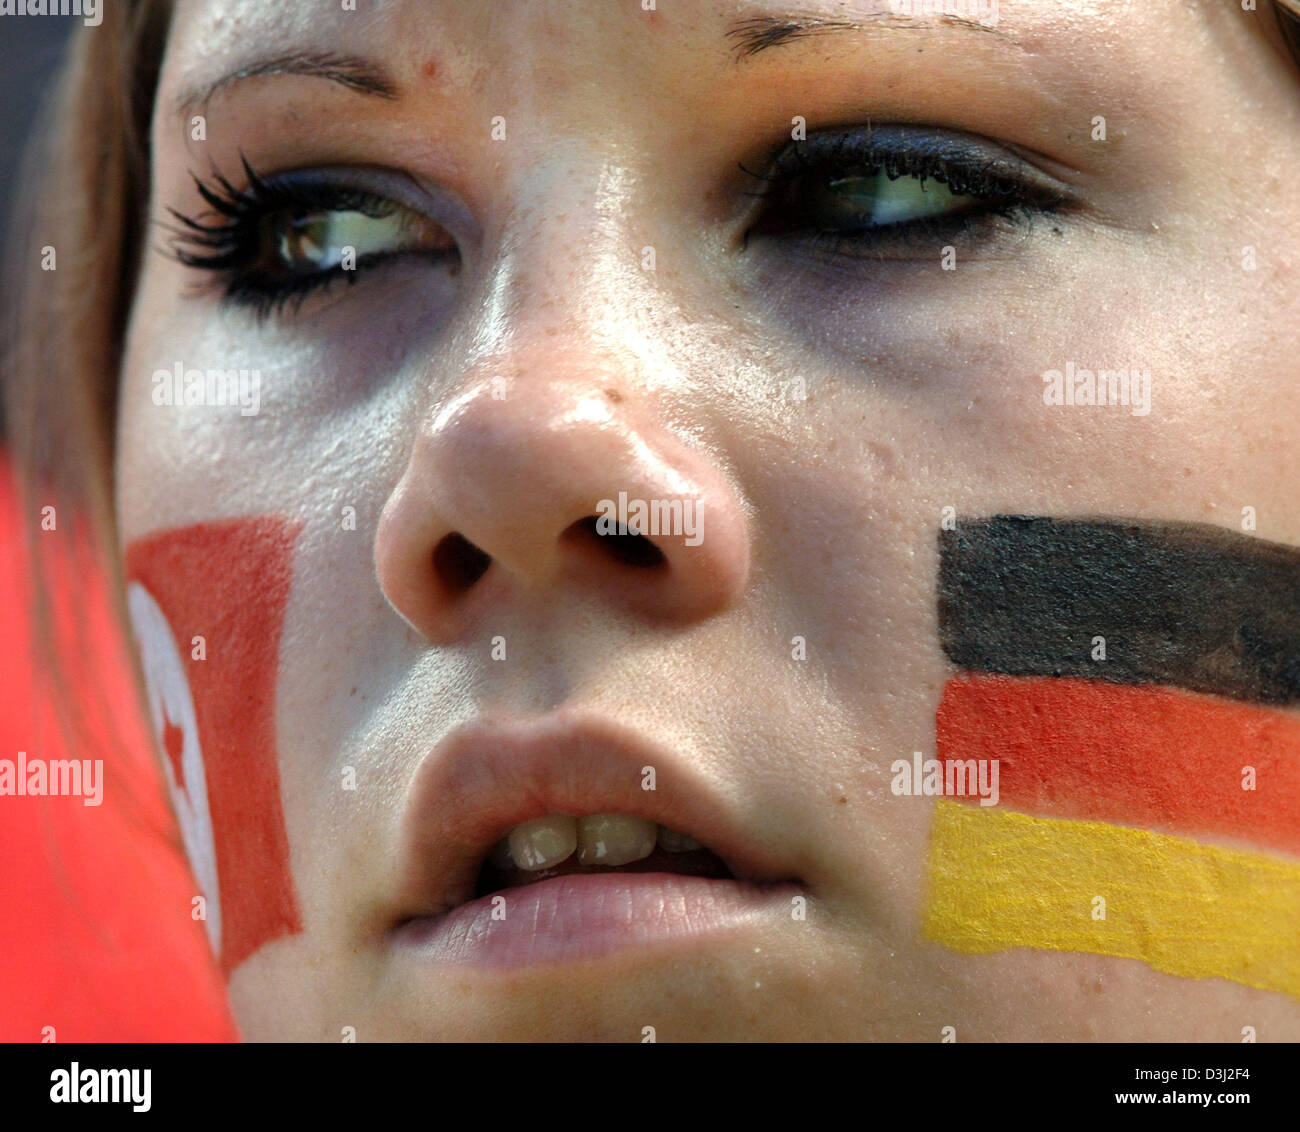 (dpa) - A German supporter watches the soccer teams prior to the group A match of the FIFA Confederations Cup tournament Tunisia - Germany in Cologne, Germany, 18 June 2005. Stock Photo